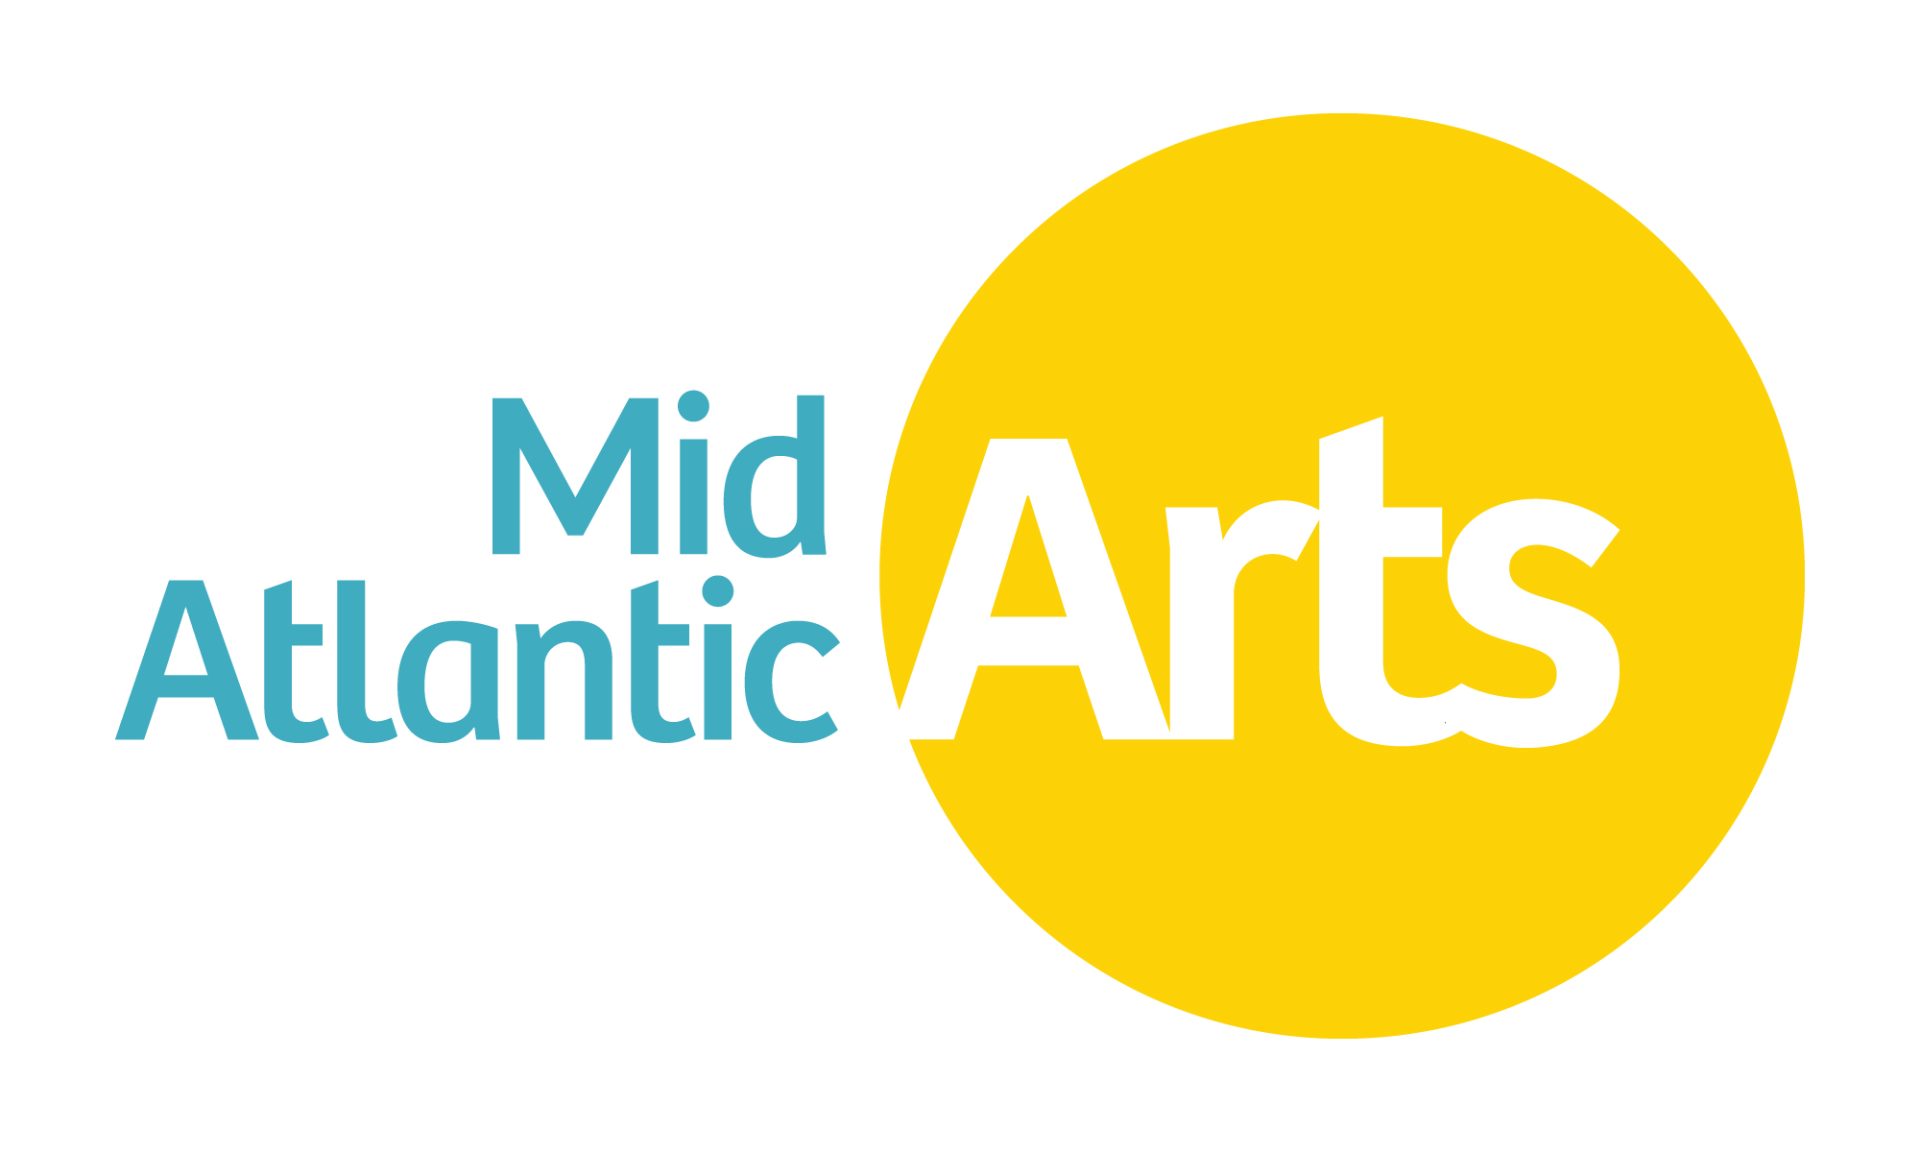 Mid Atlantic Arts logo with blue text and yellow circle